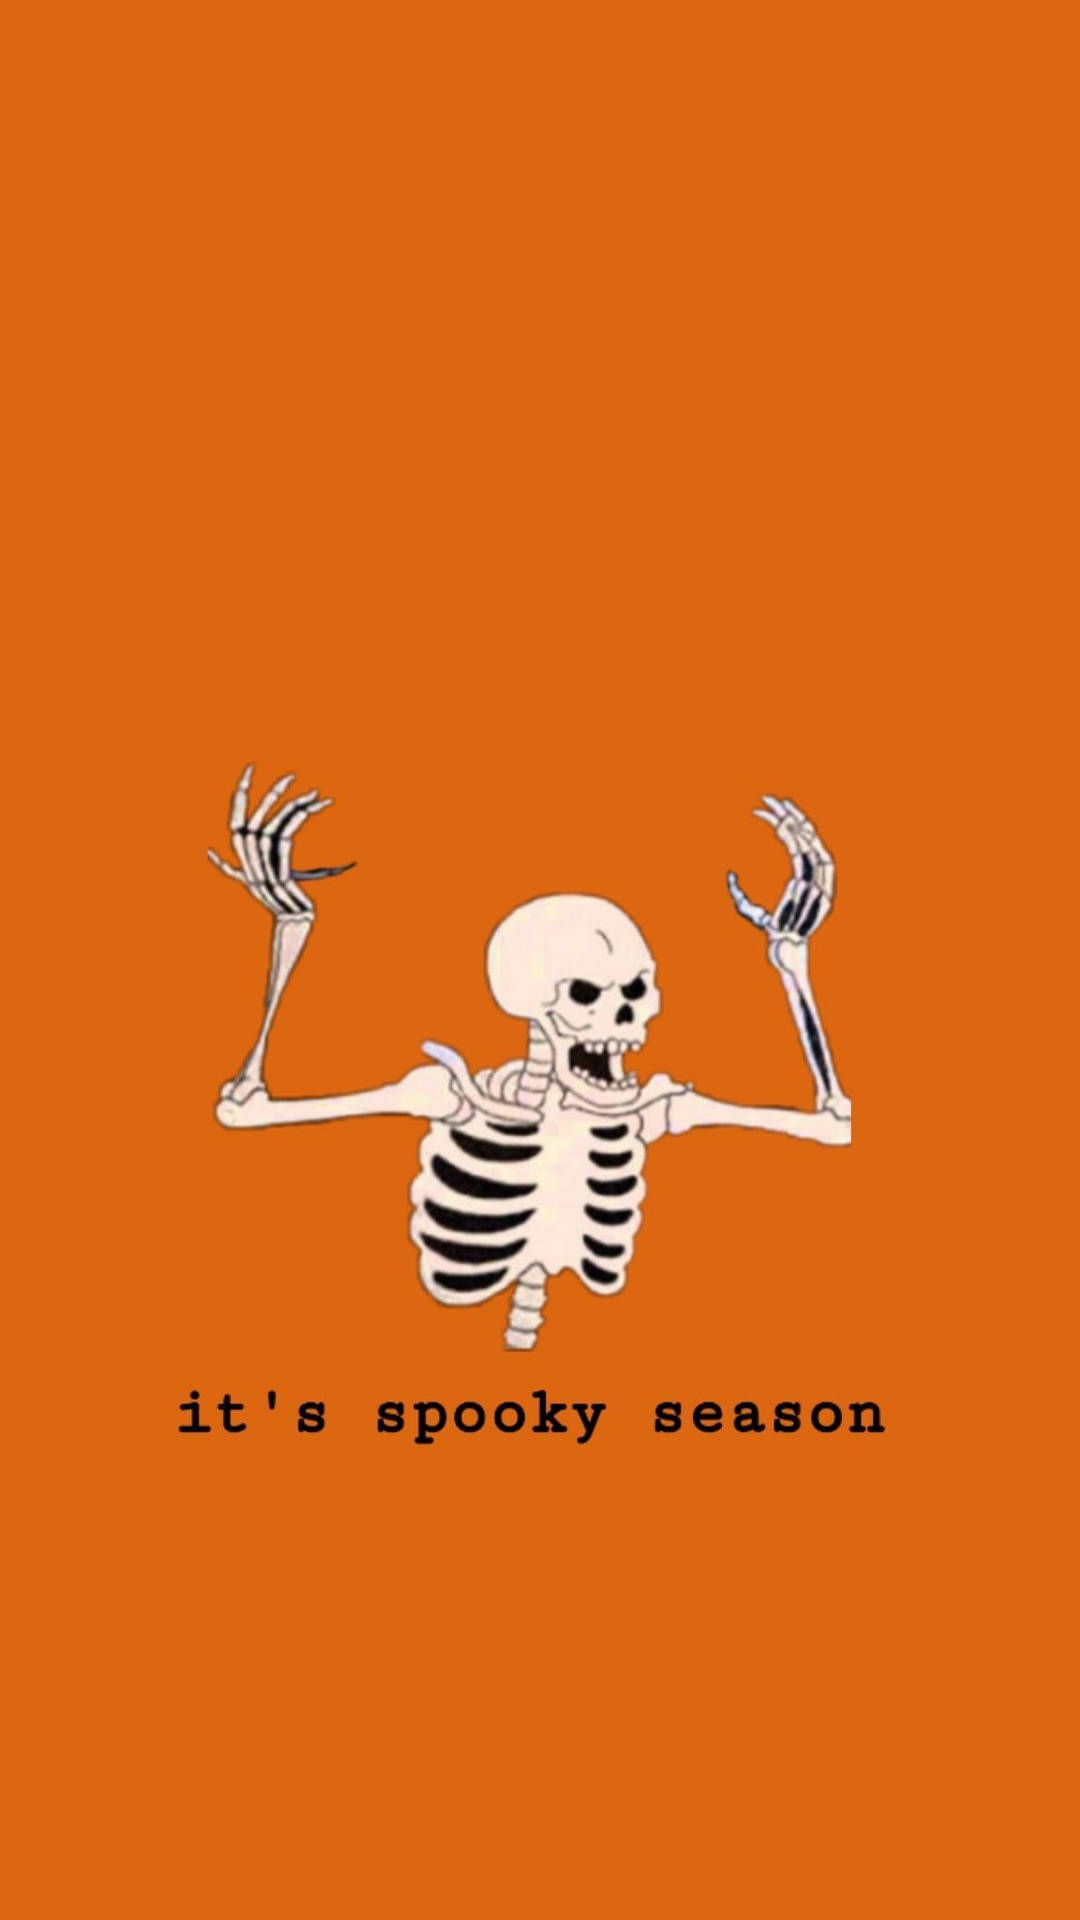 Get ready to be spooked this Spooky Season Wallpaper